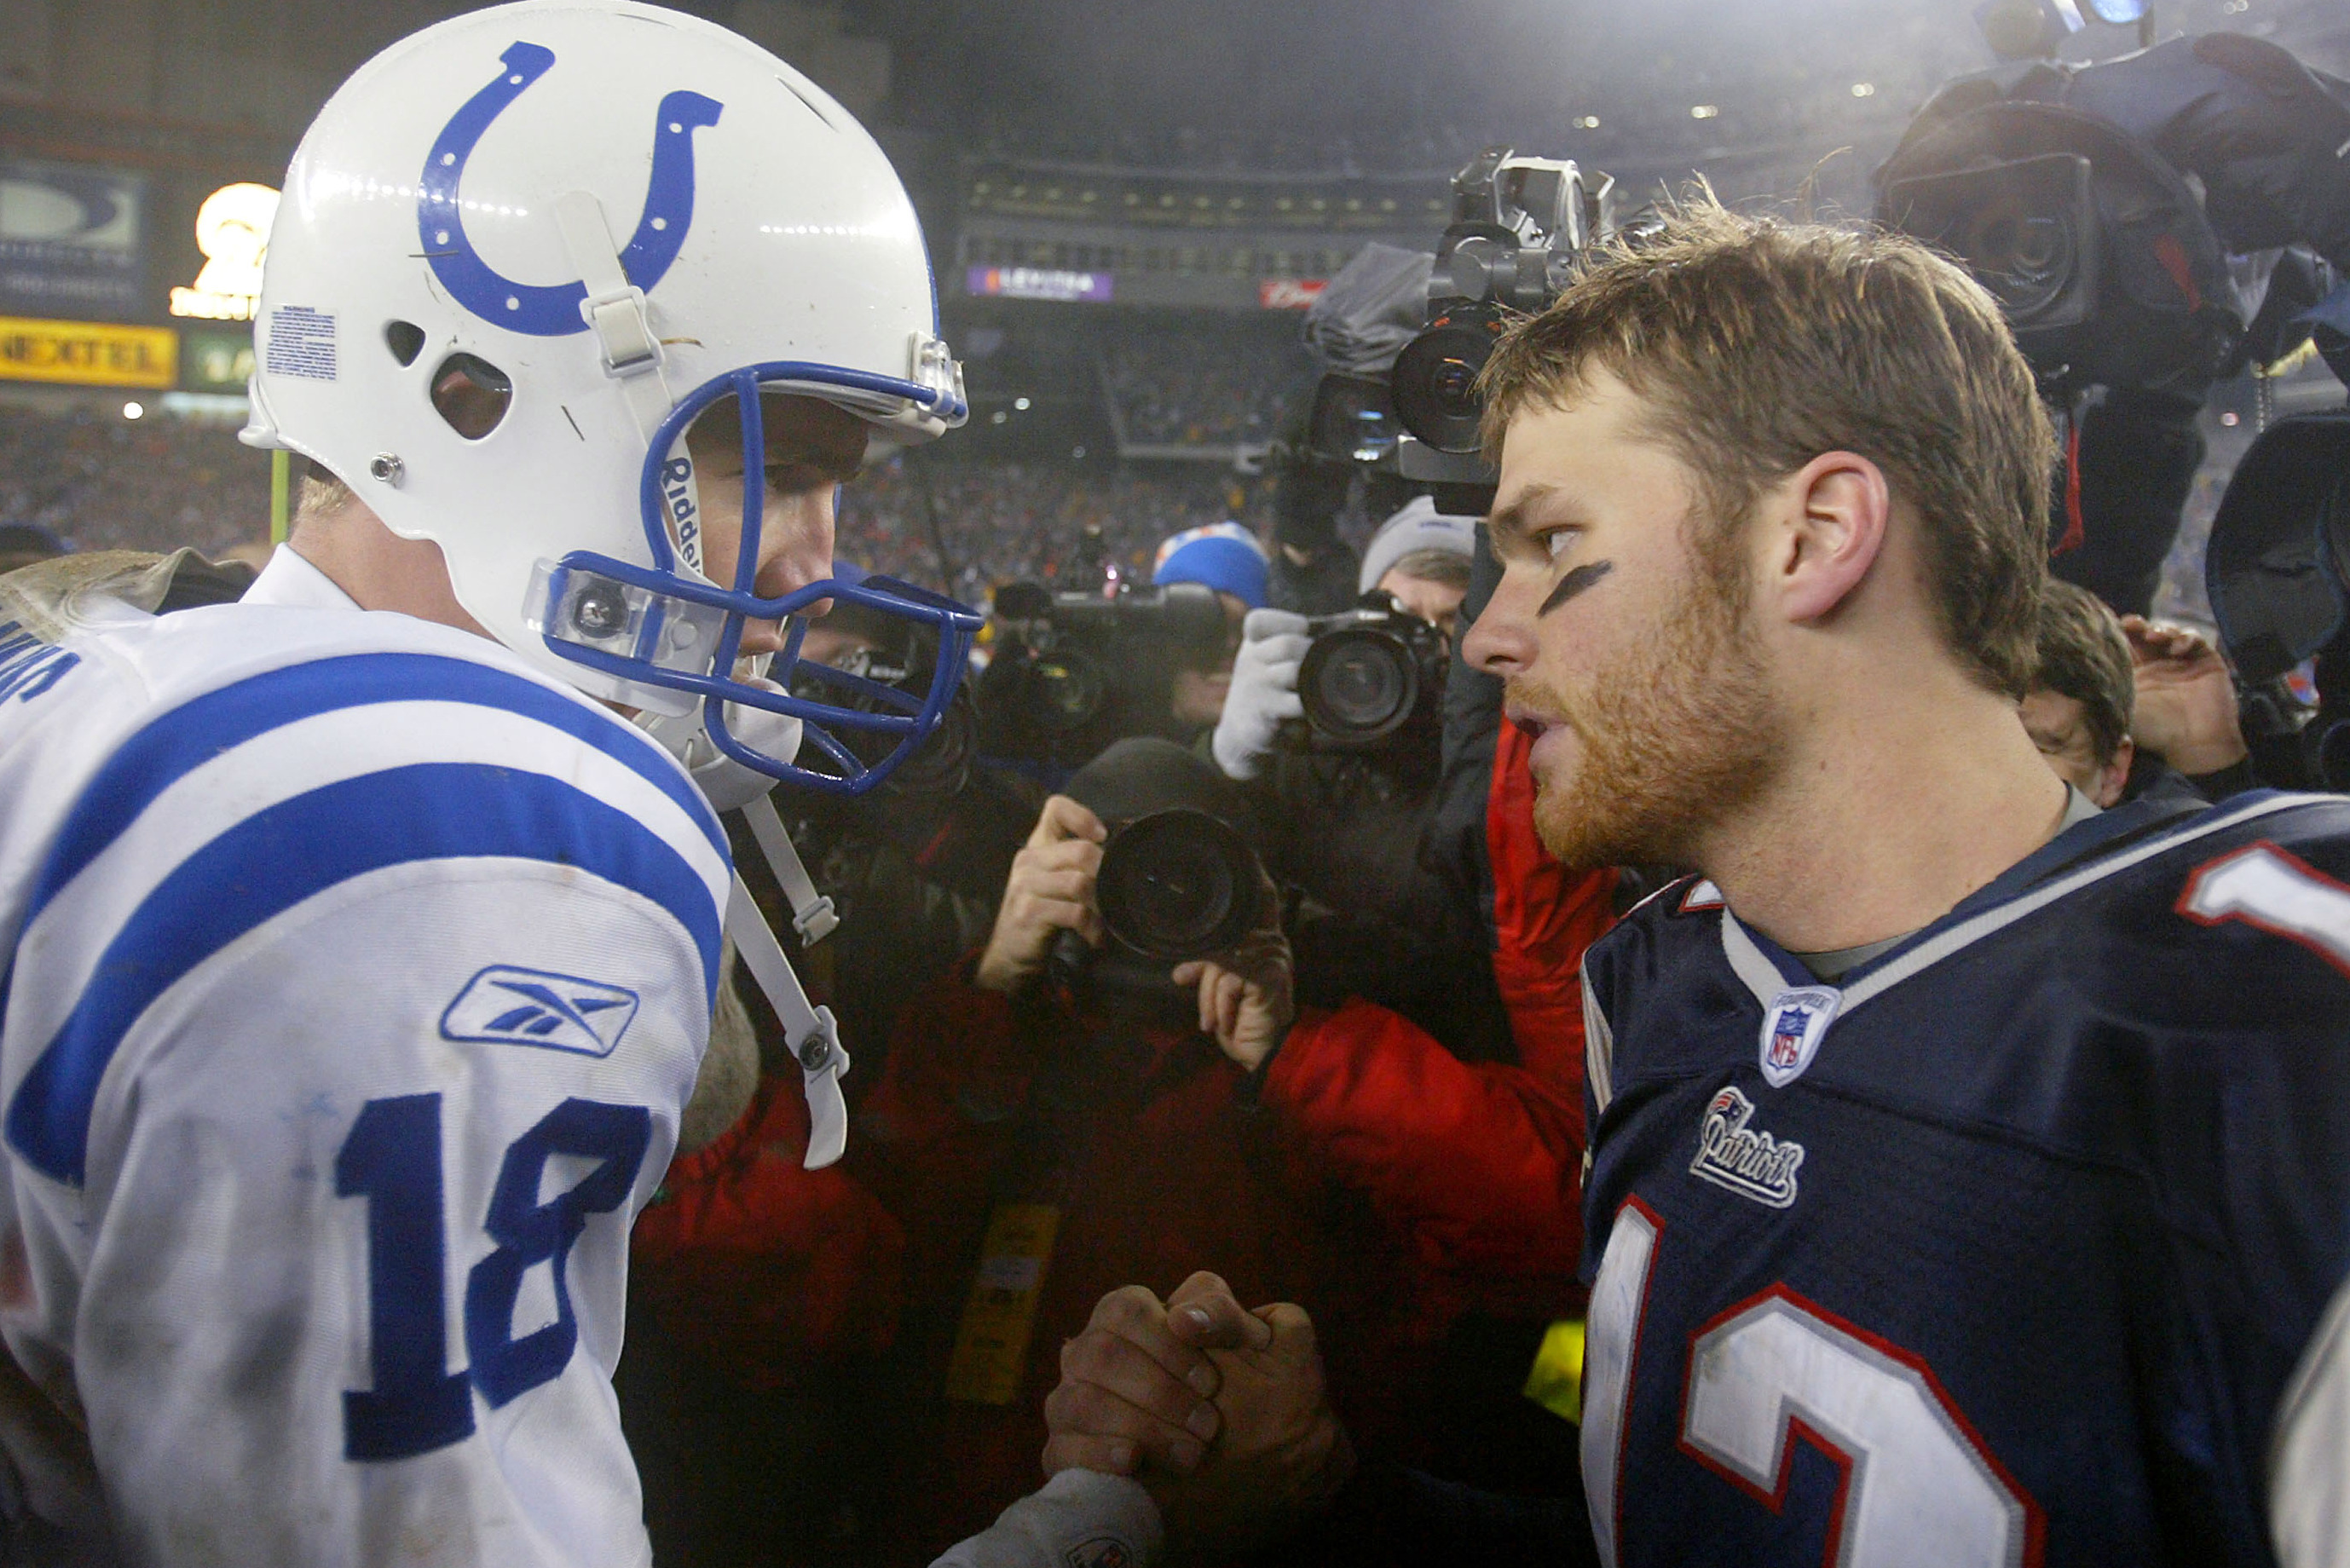 Colts vs Patriots rivalry in 2022 just hits different. : r/Colts